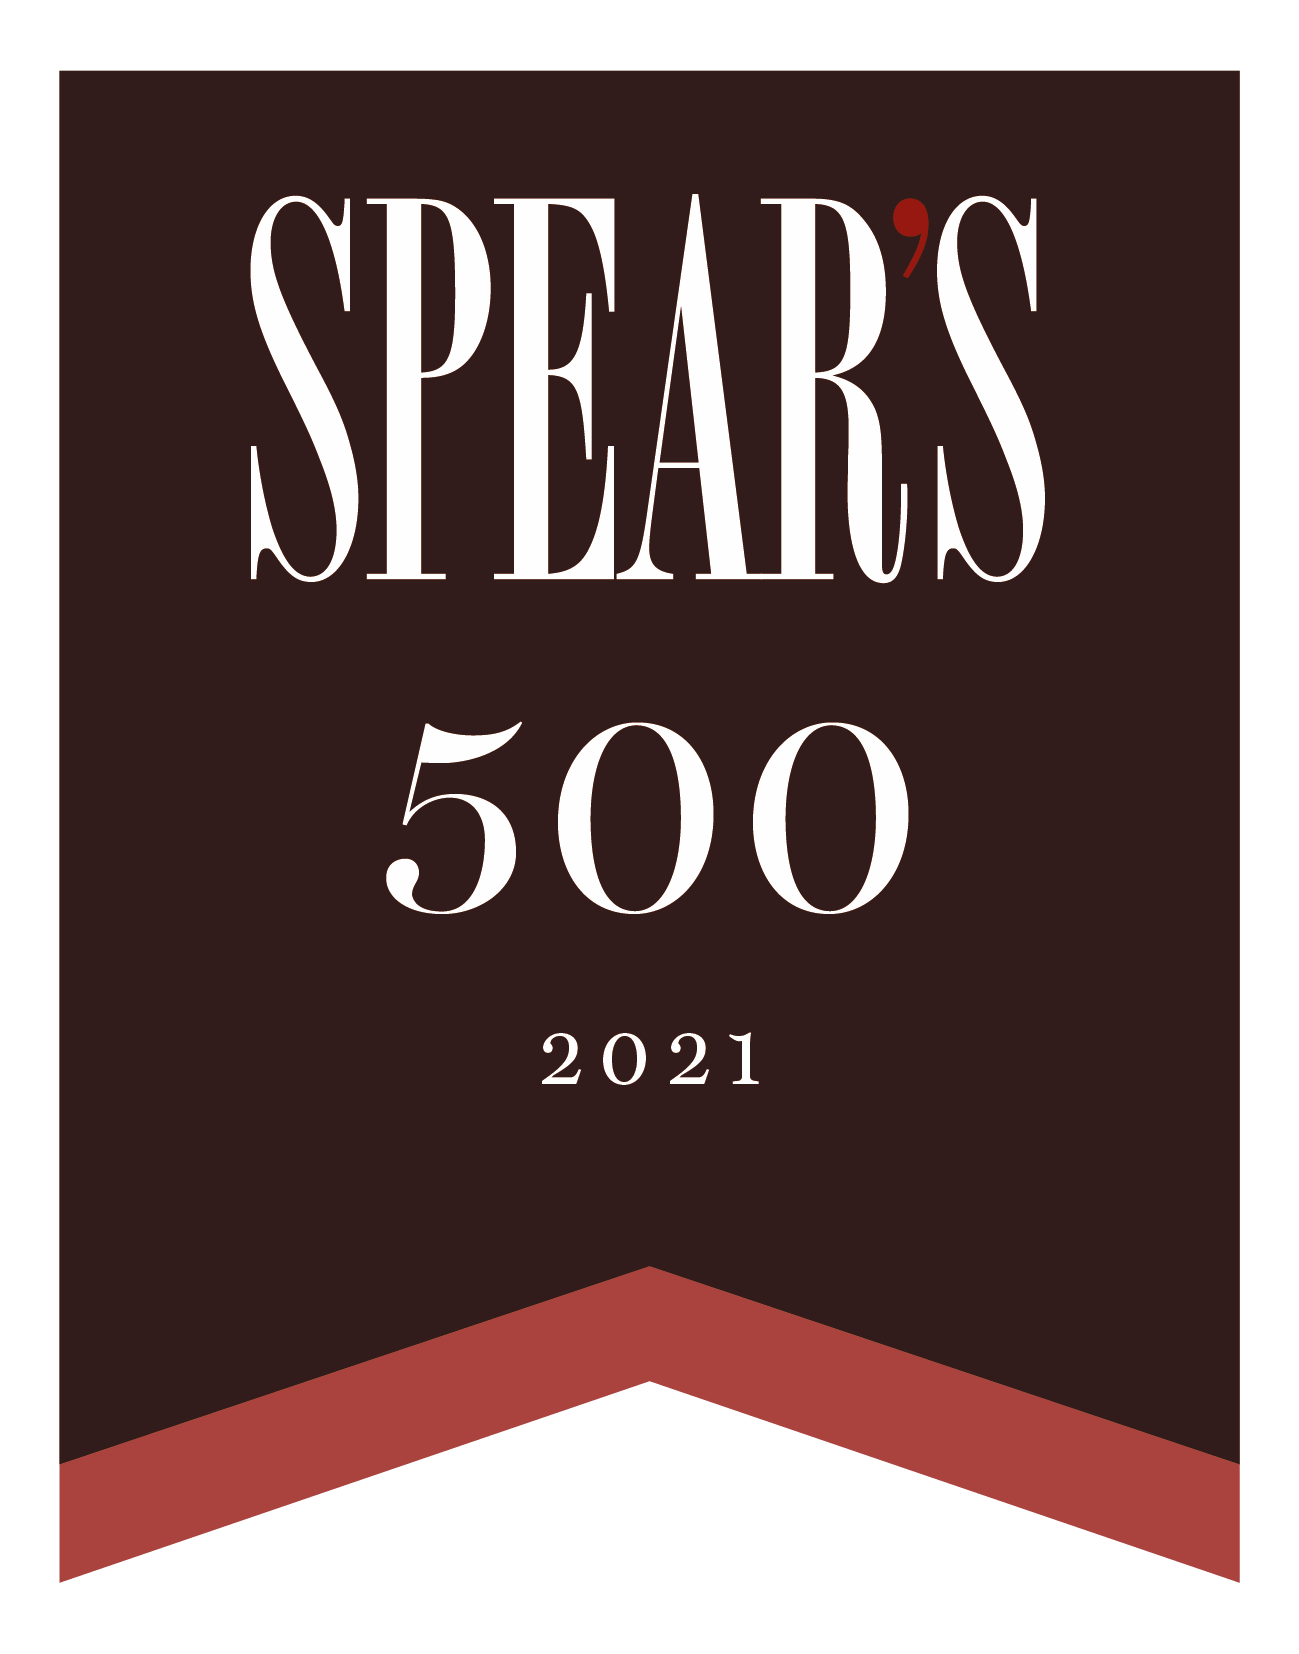 spears 500 2021 ribbon - About Us